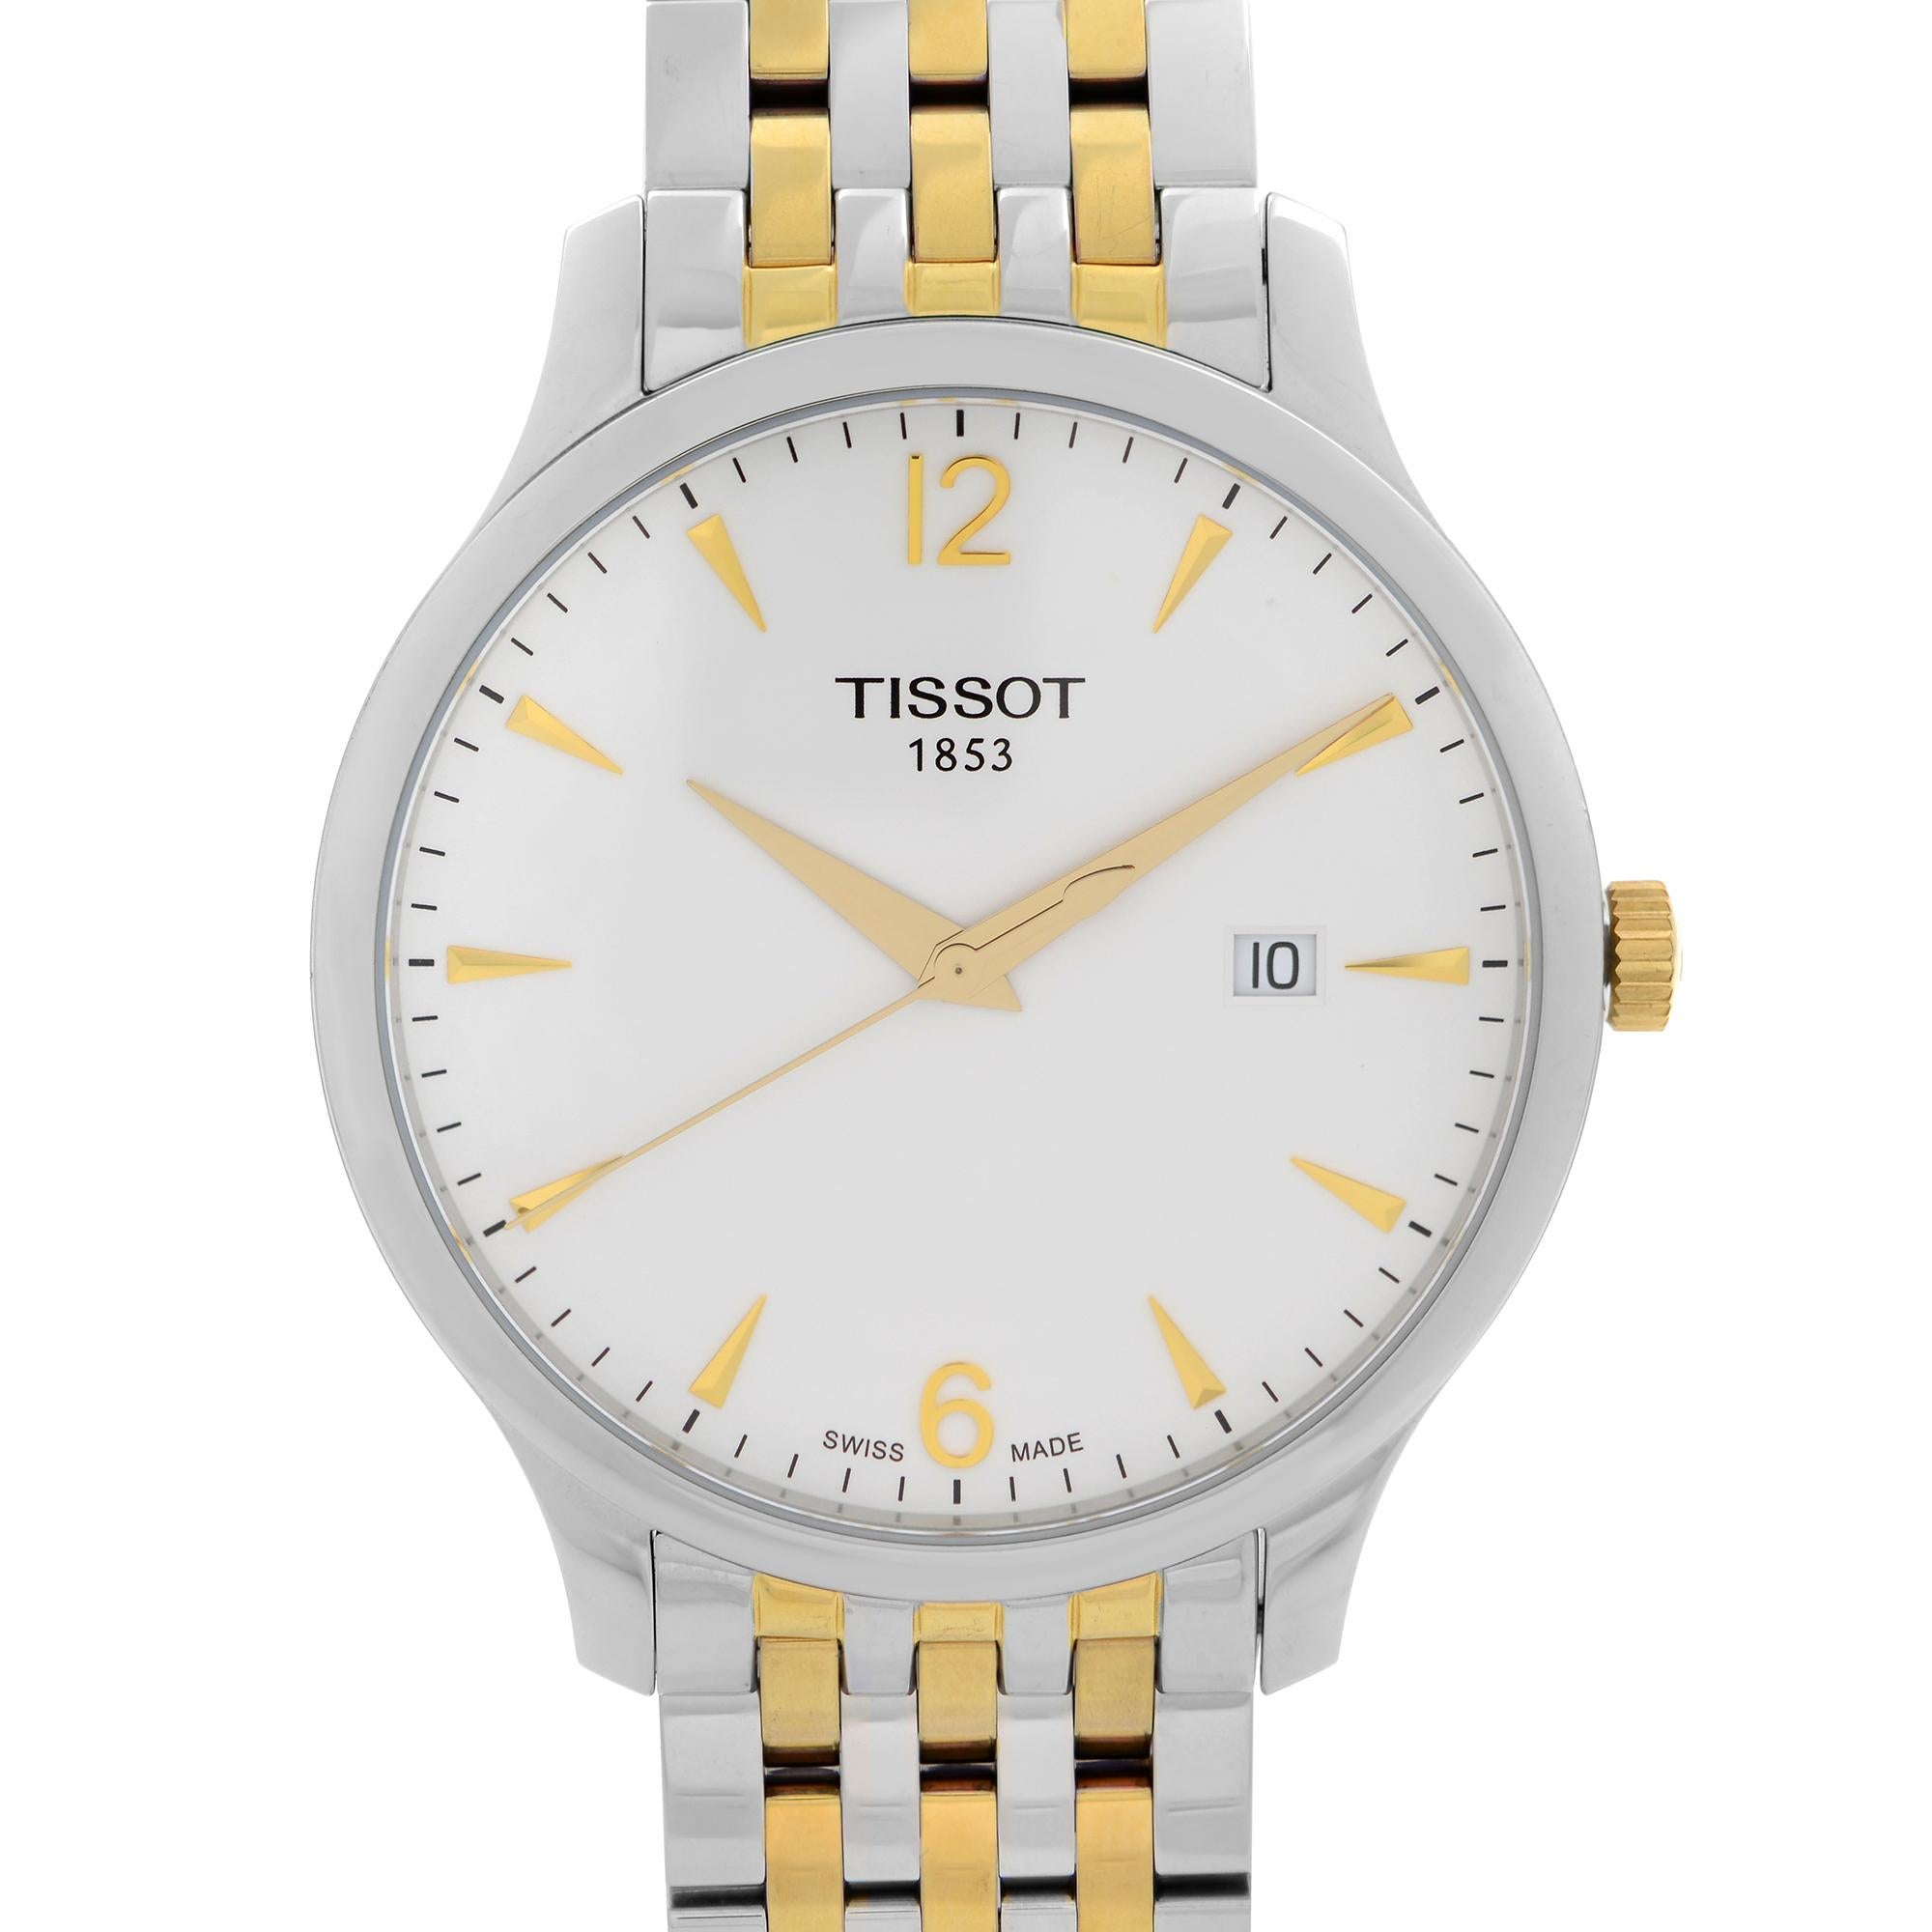 Display Tissot T-Classic Tradition Stainless Steel White Dial Men's Quartz Watch T063.610.22.037.00. This Beautiful Timepiece Features: Stainless Steel Case with a Two-Tone Stainless Steel Bracelet. Fixed Steel Bezel. White Dial with Gold-Tone Hands